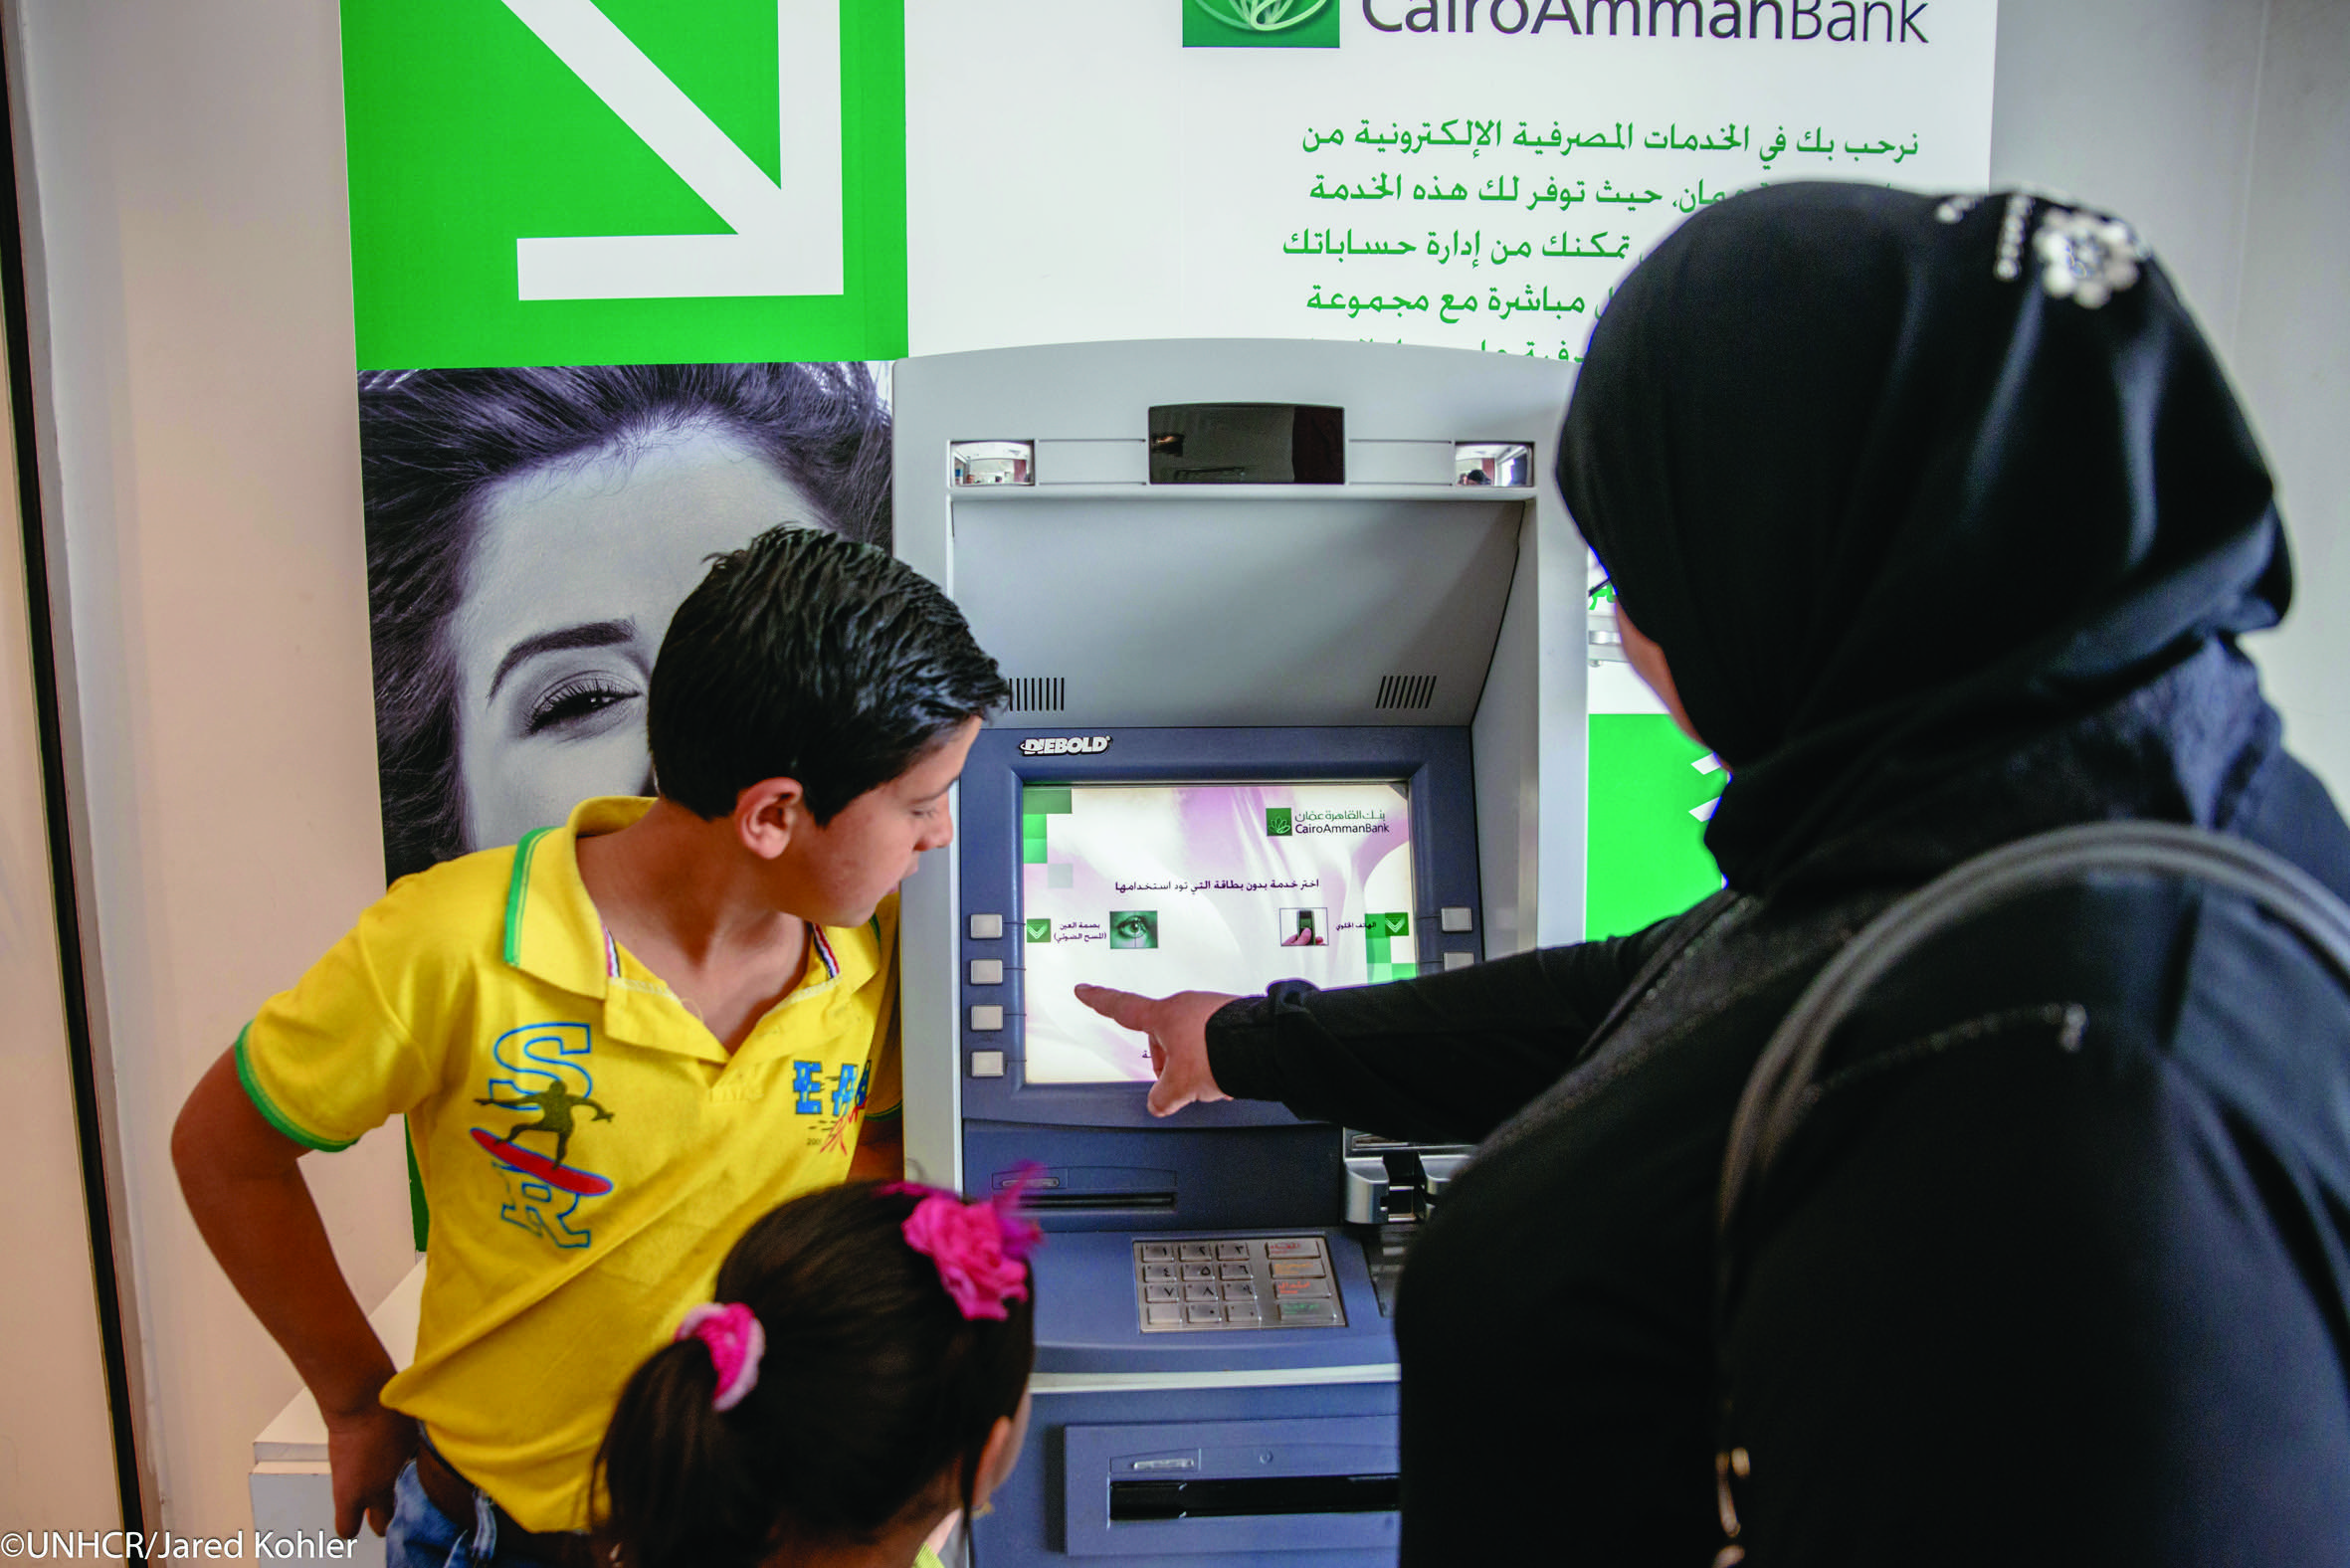 Syrian refugee using iris scan technology to withdraw monthly cash assistance, Amman, Jordan.